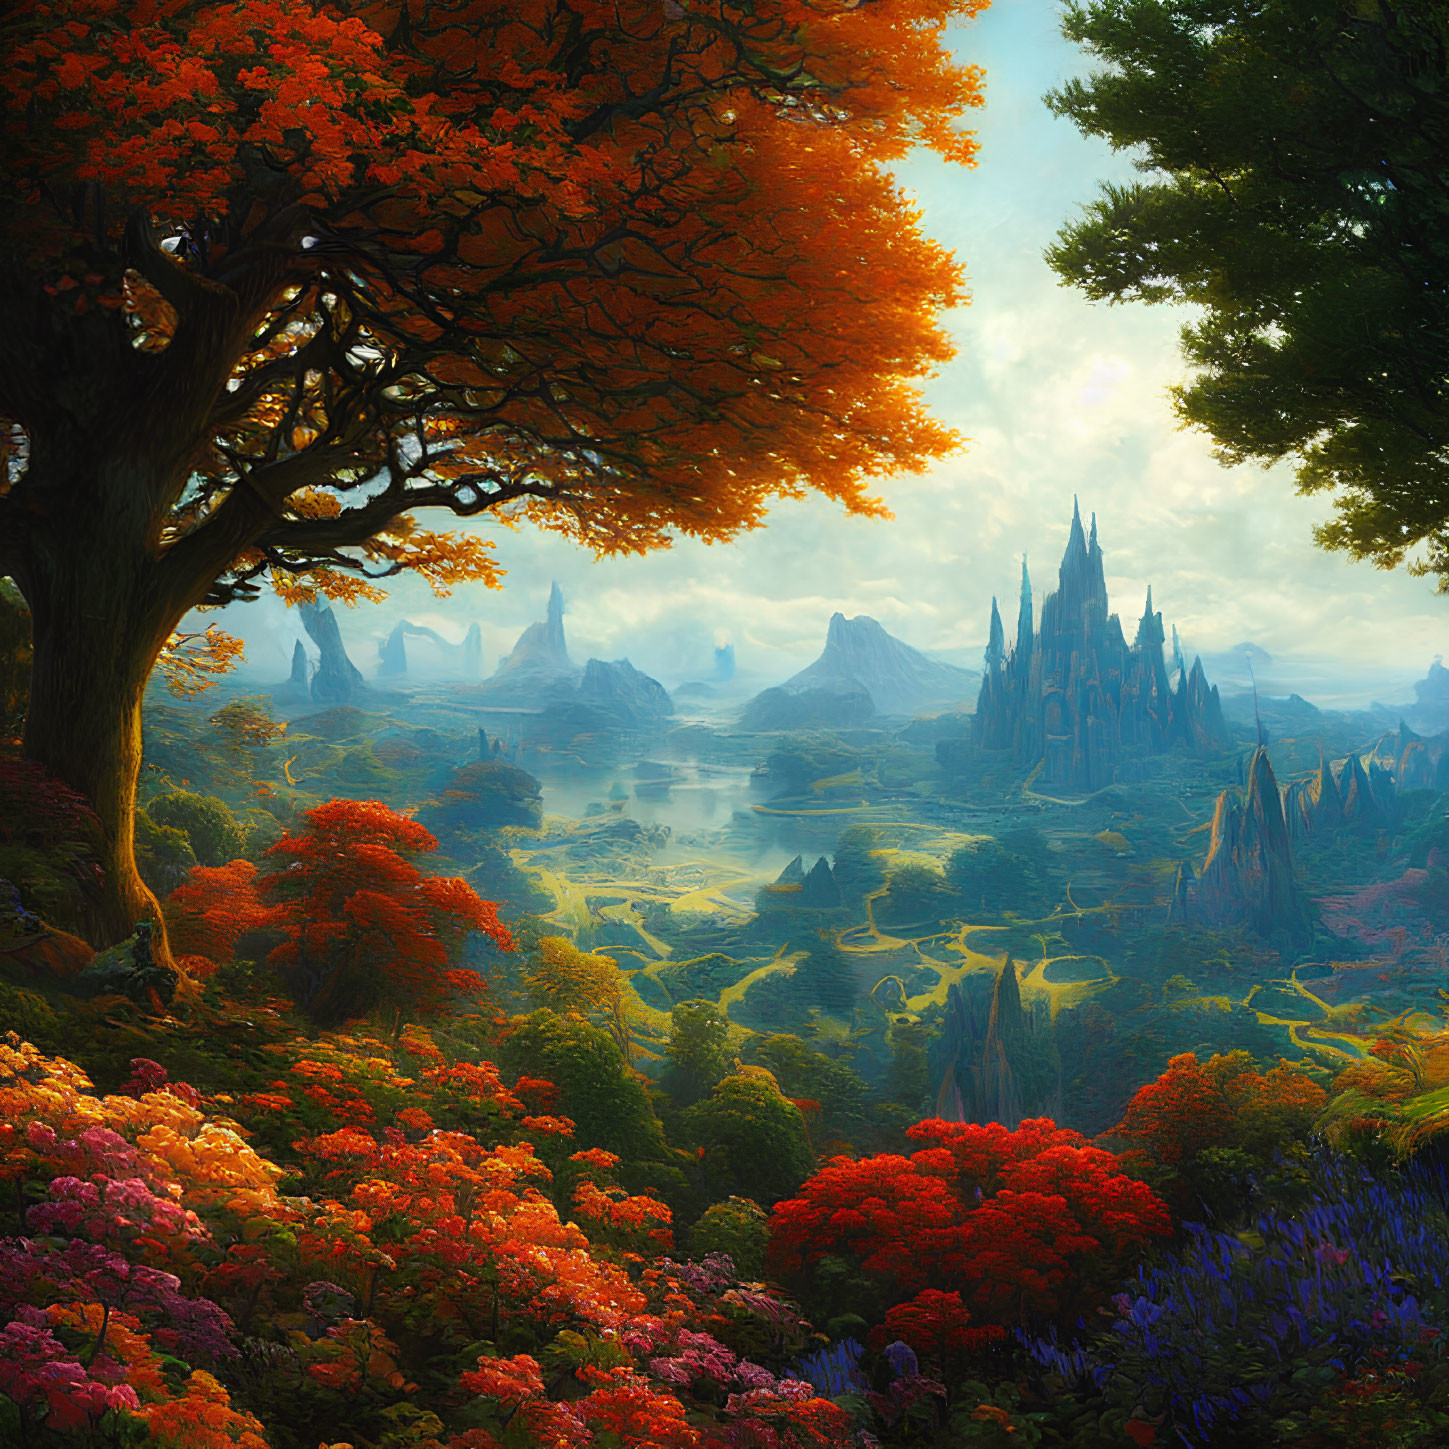 Colorful fantasy landscape with orange-leaved tree and distant spires